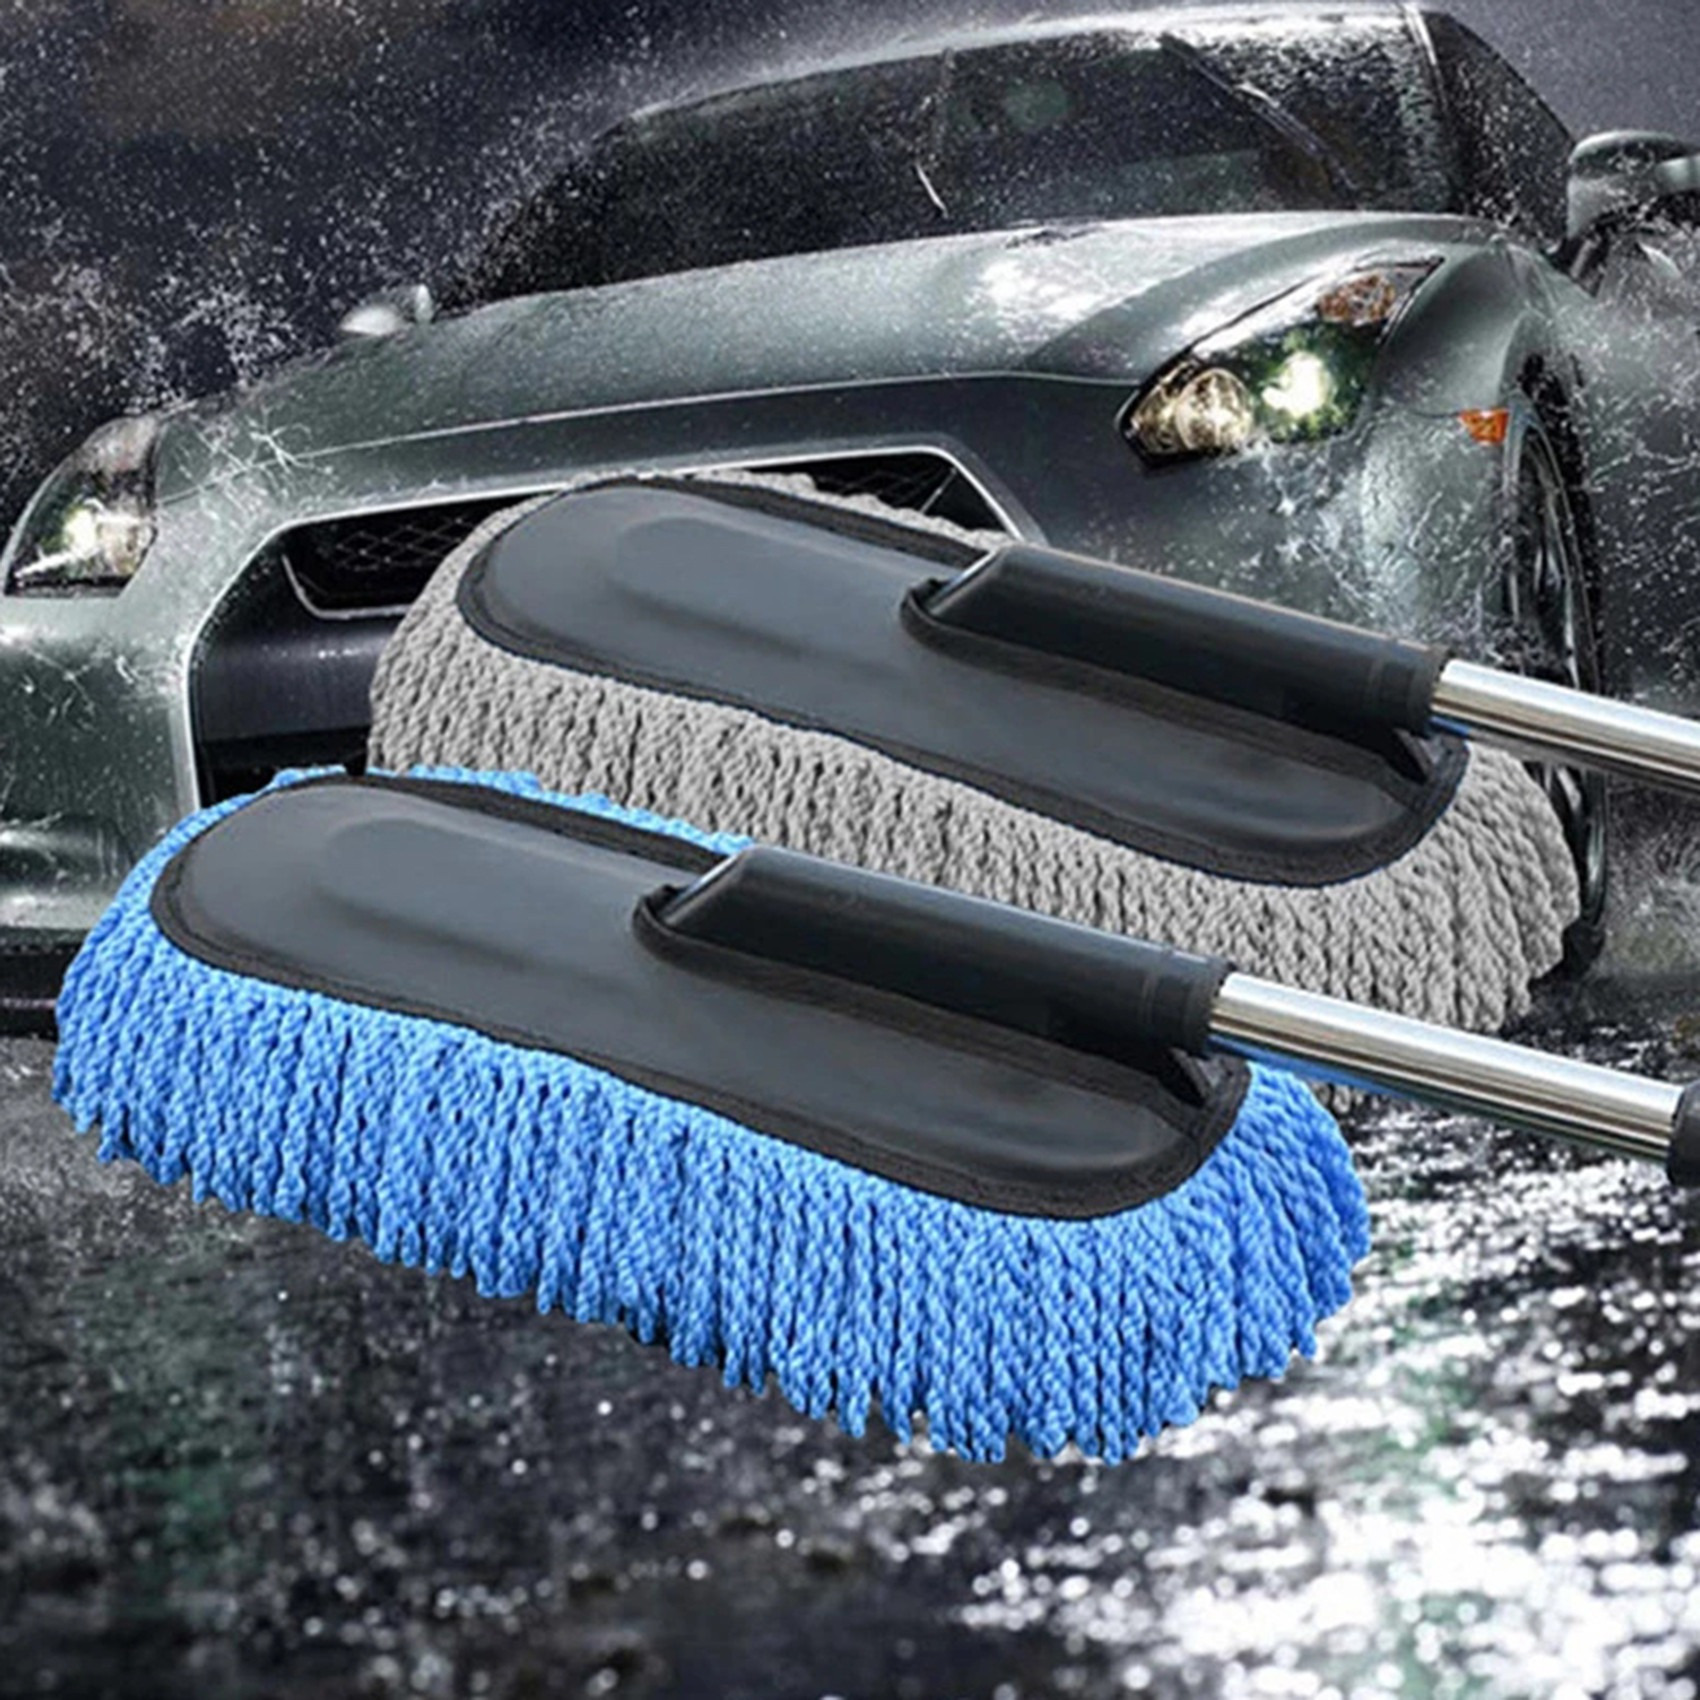 

2pcs Effortlessly Clean Your Car With This Removable & Washable Telescopic Dust Remover Mop Brush!